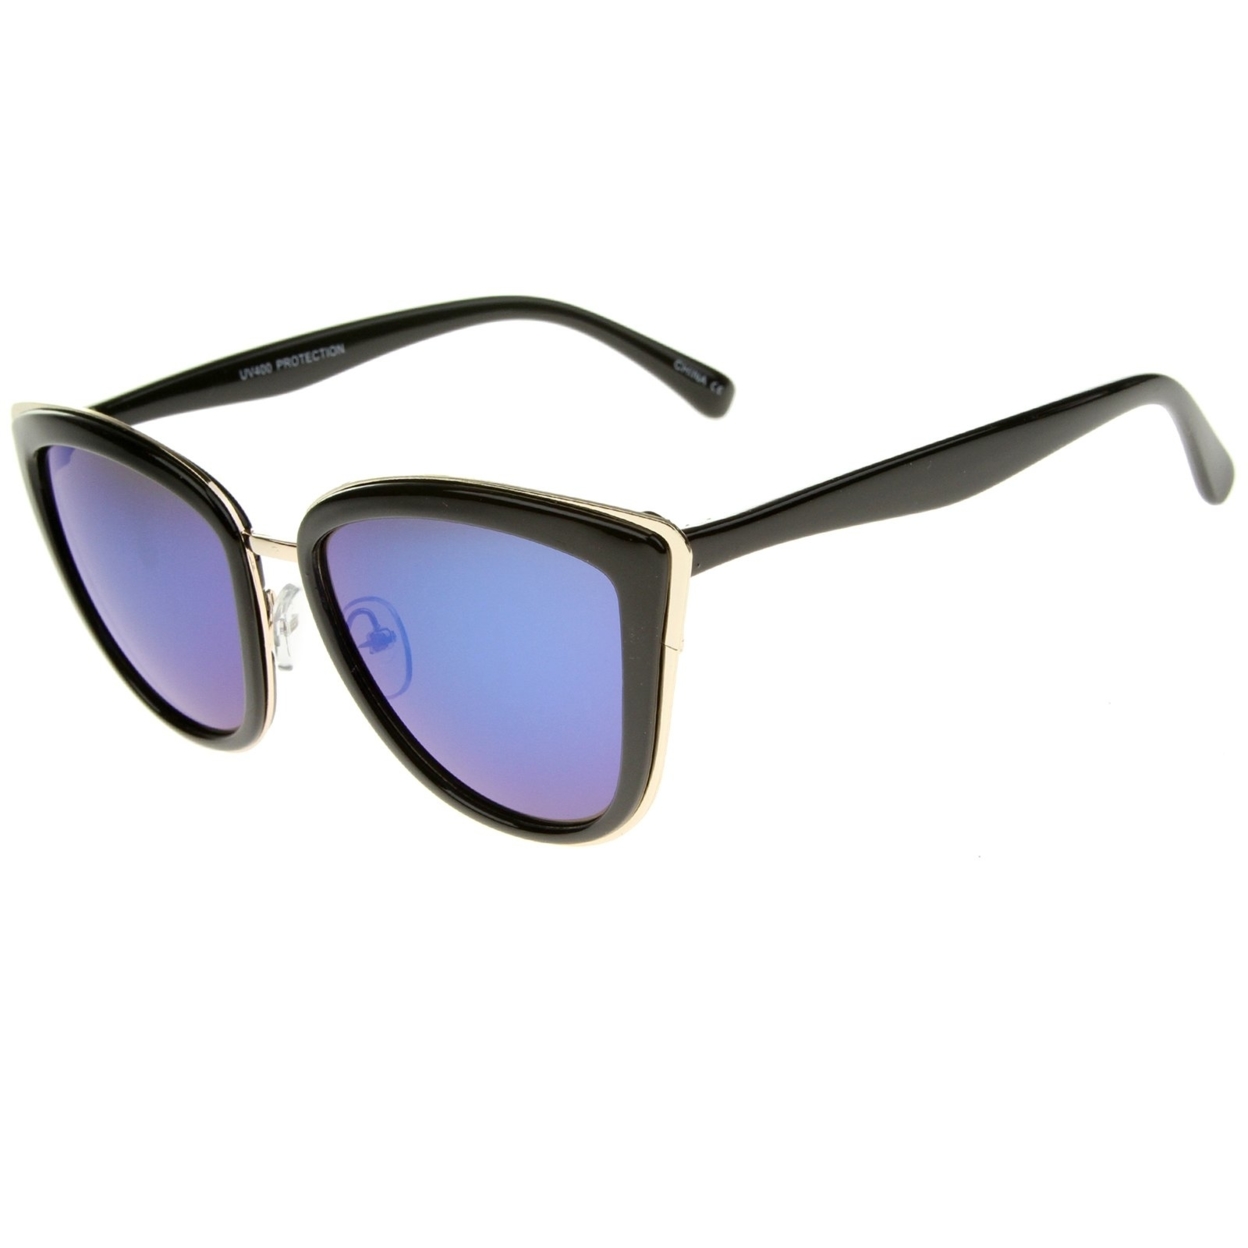 High Fashion Metal Outer Frame Color Mirror Lens Oversized Cat Eye Sunglasses 55mm - Black-Gold / Blue Mirror